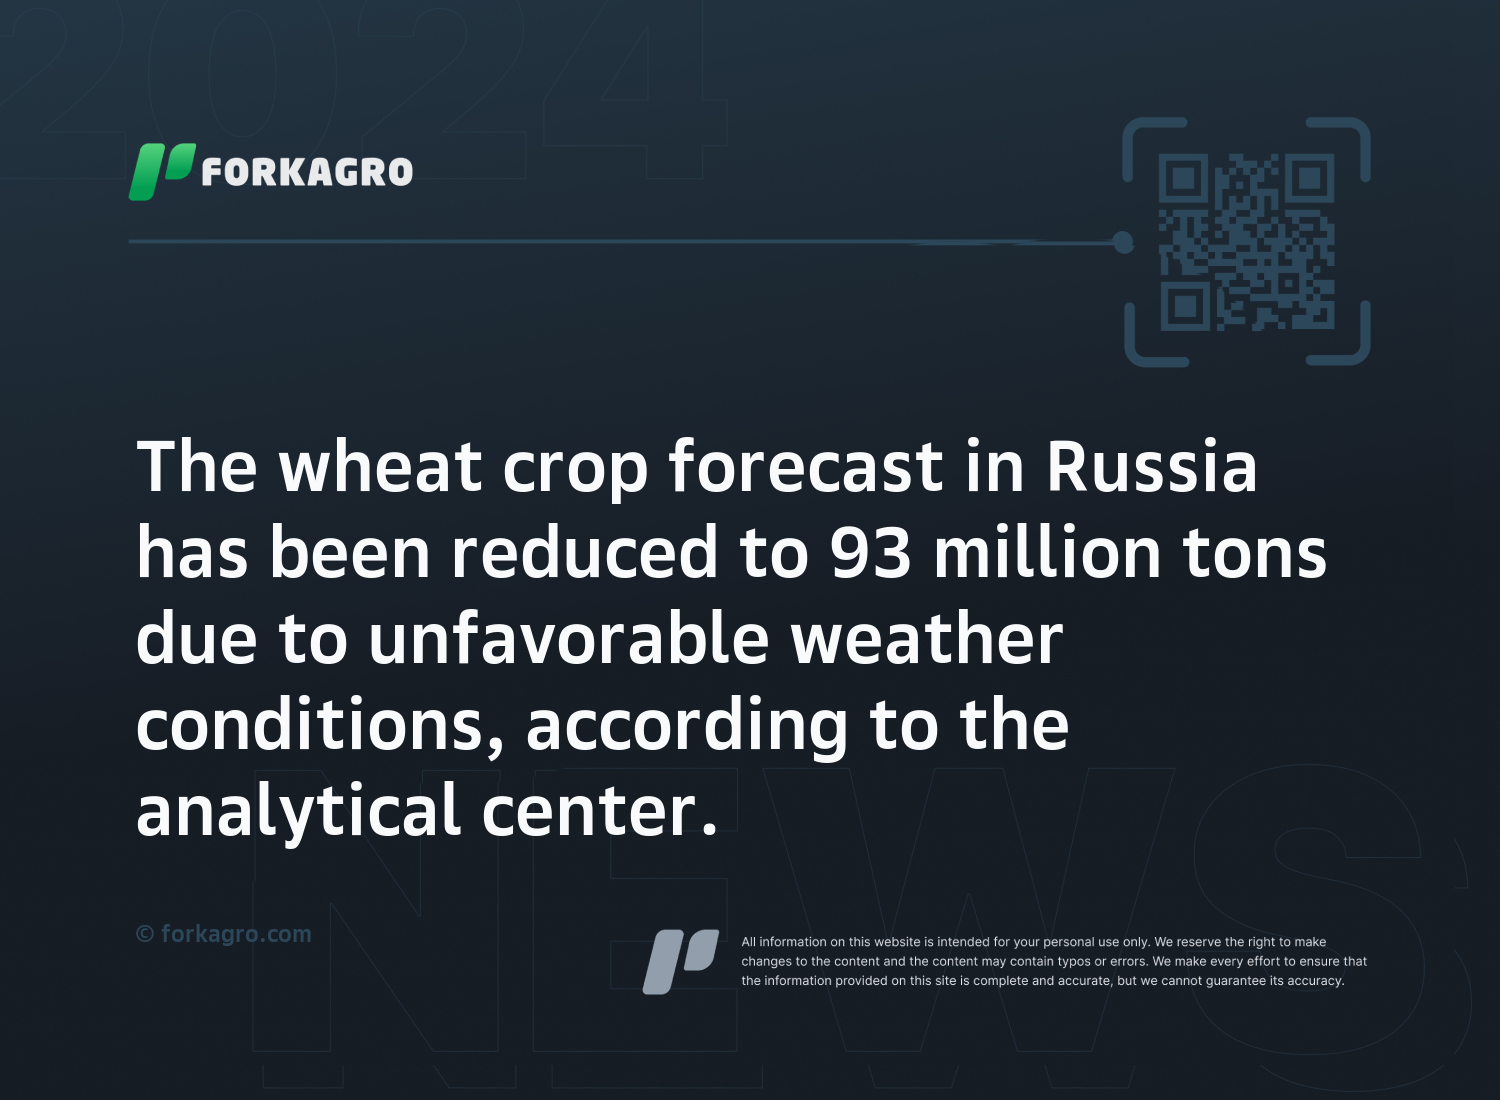 The wheat crop forecast in Russia has been reduced to 93 million tons due to unfavorable weather conditions, according to the analytical center.